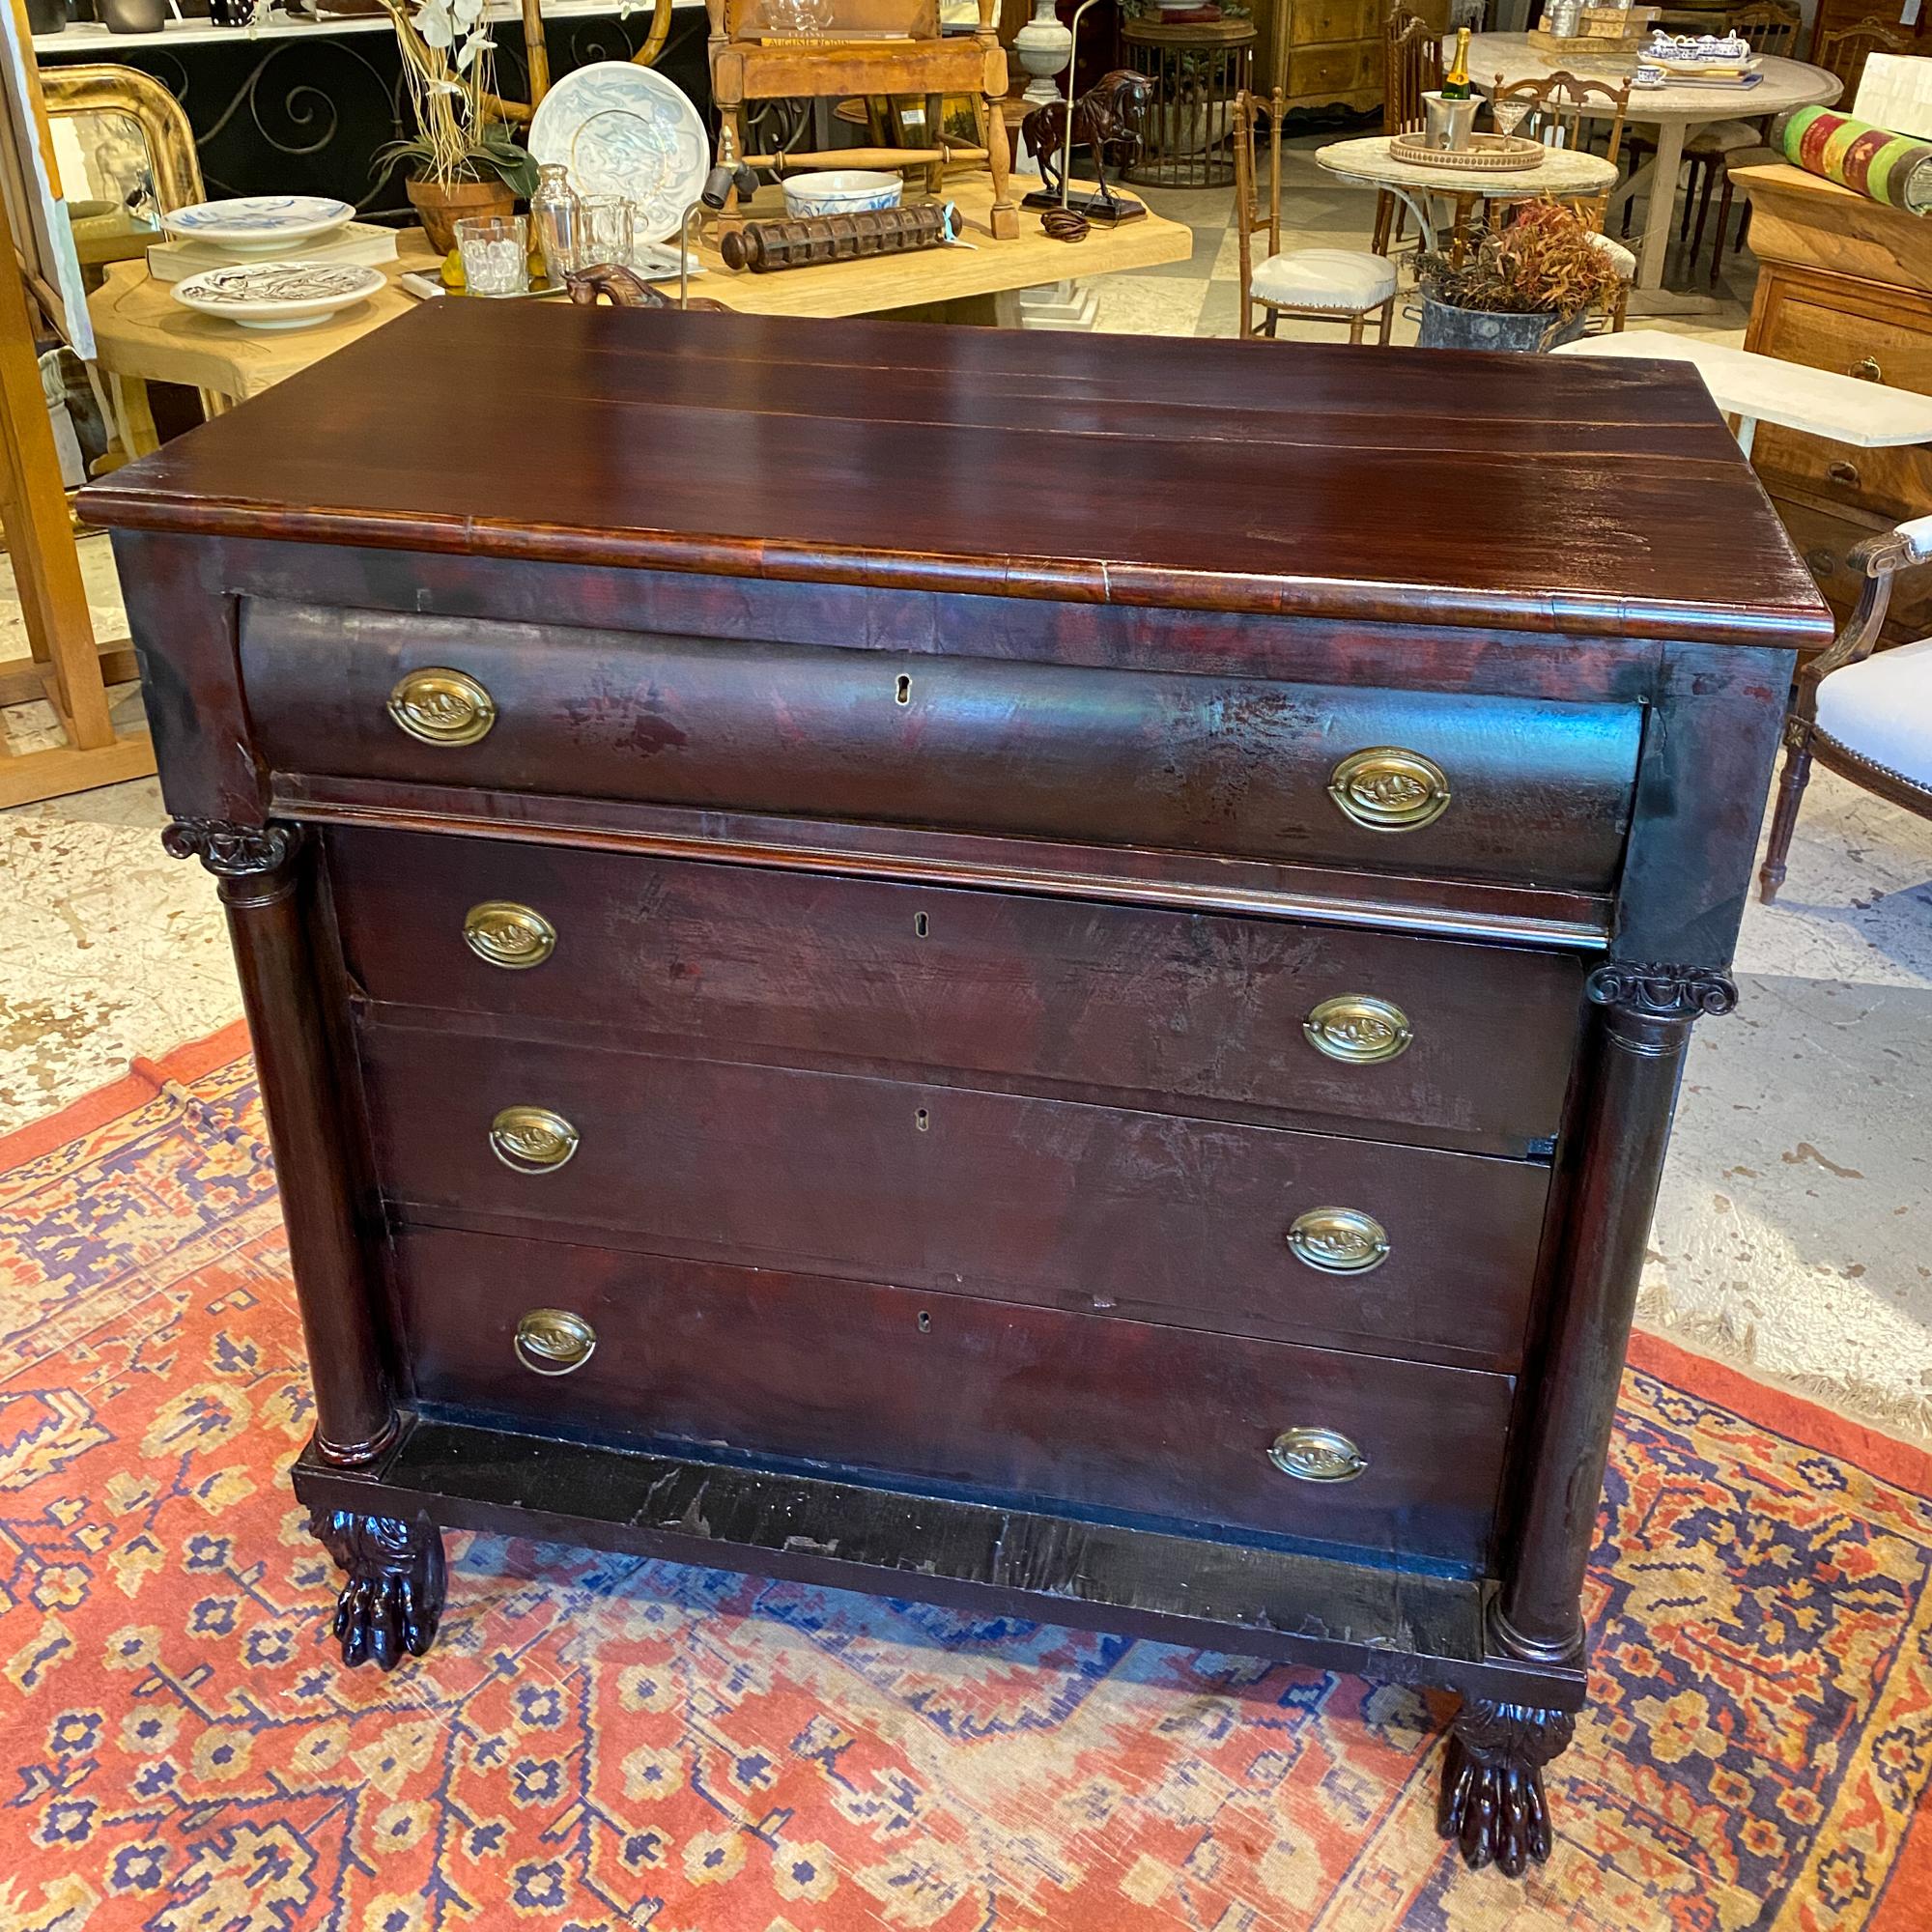 This stately Empire style chest of drawers features ornately carved paw feet at the front, four generous drawers, pillar details and brass hardware. The oval-shaped brass bail pulls have thistle decorations cast into the bail plate. Each drawer has